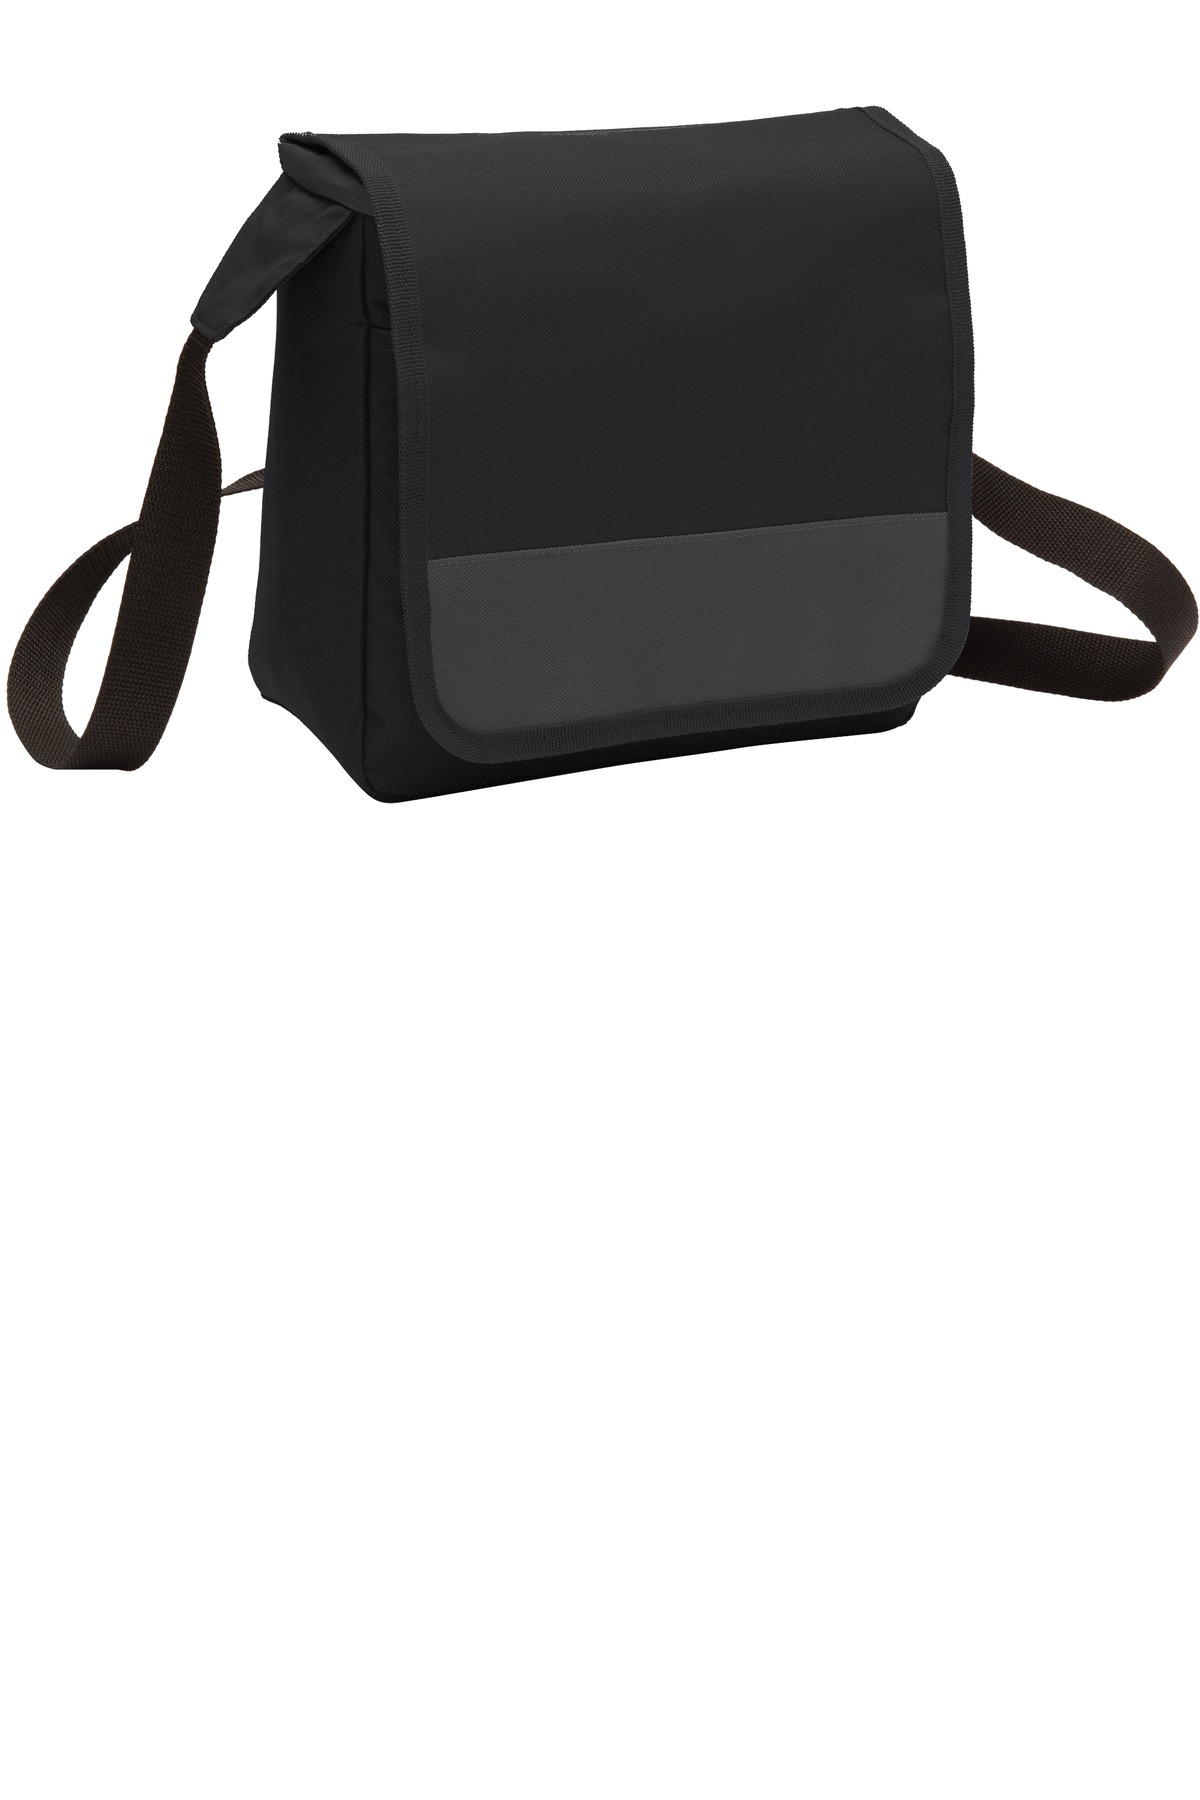 Port Authority Hospitality Bags ® Lunch Cooler Messenger.-Port Authority